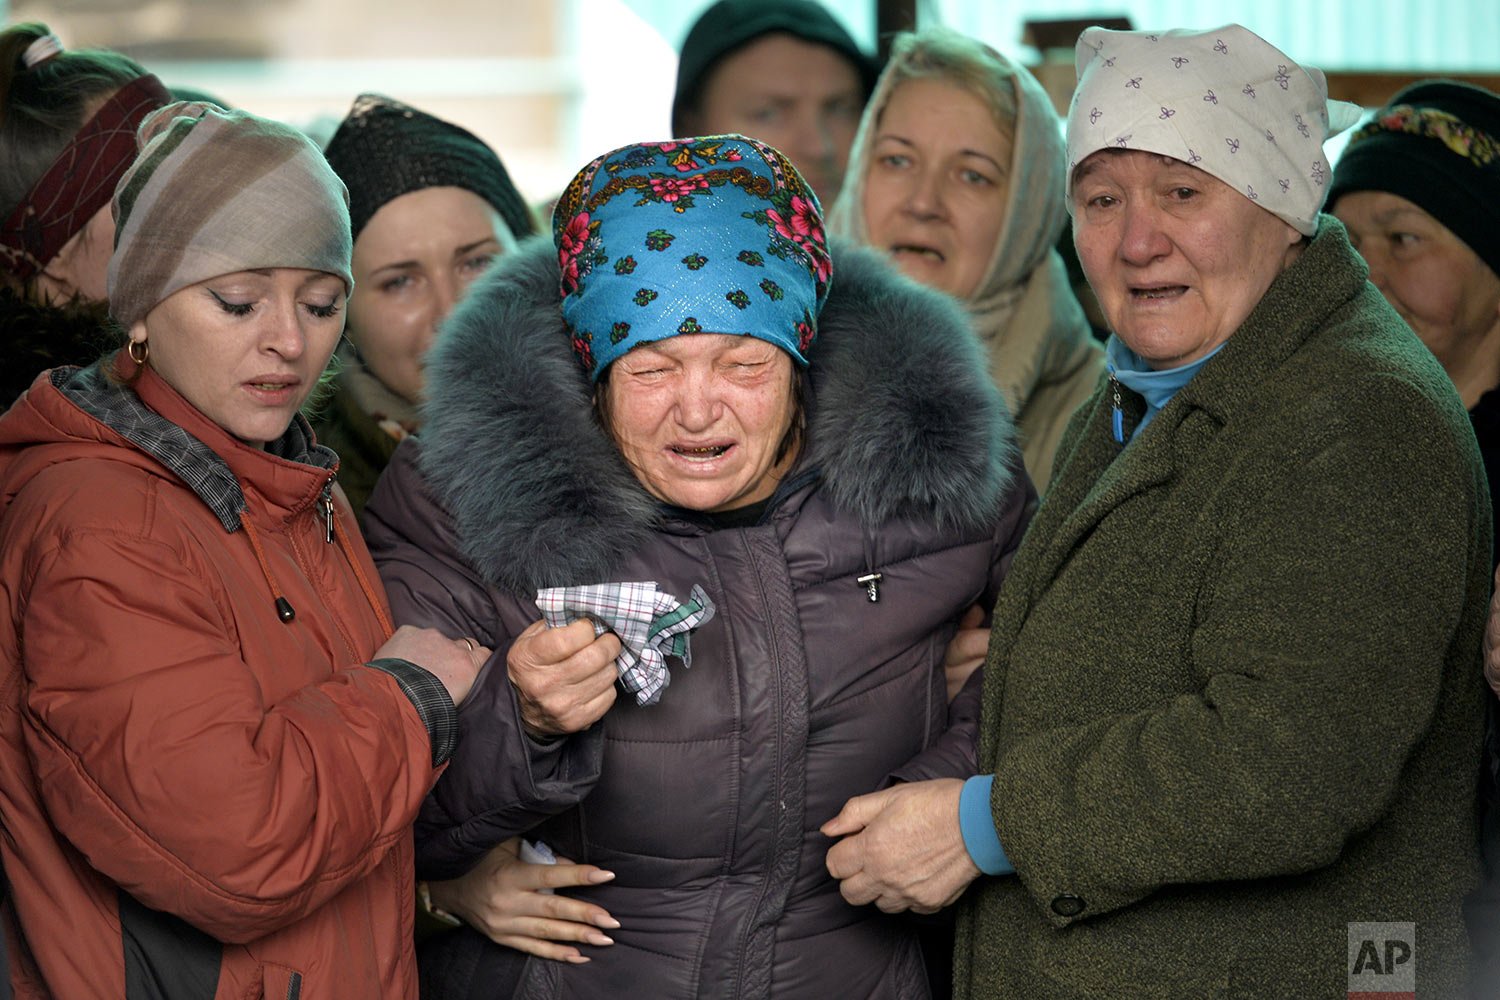  The mother of Russian Army soldier Rustam Zarifulin, who was killed fighting in Ukraine, cries surrounded by relatives during a farewell ceremony in his hometown of Kara-Balta, west of Bishkek, Kyrgyzstan, Sunday, March 27, 2022. (AP Photo/Vladimir 